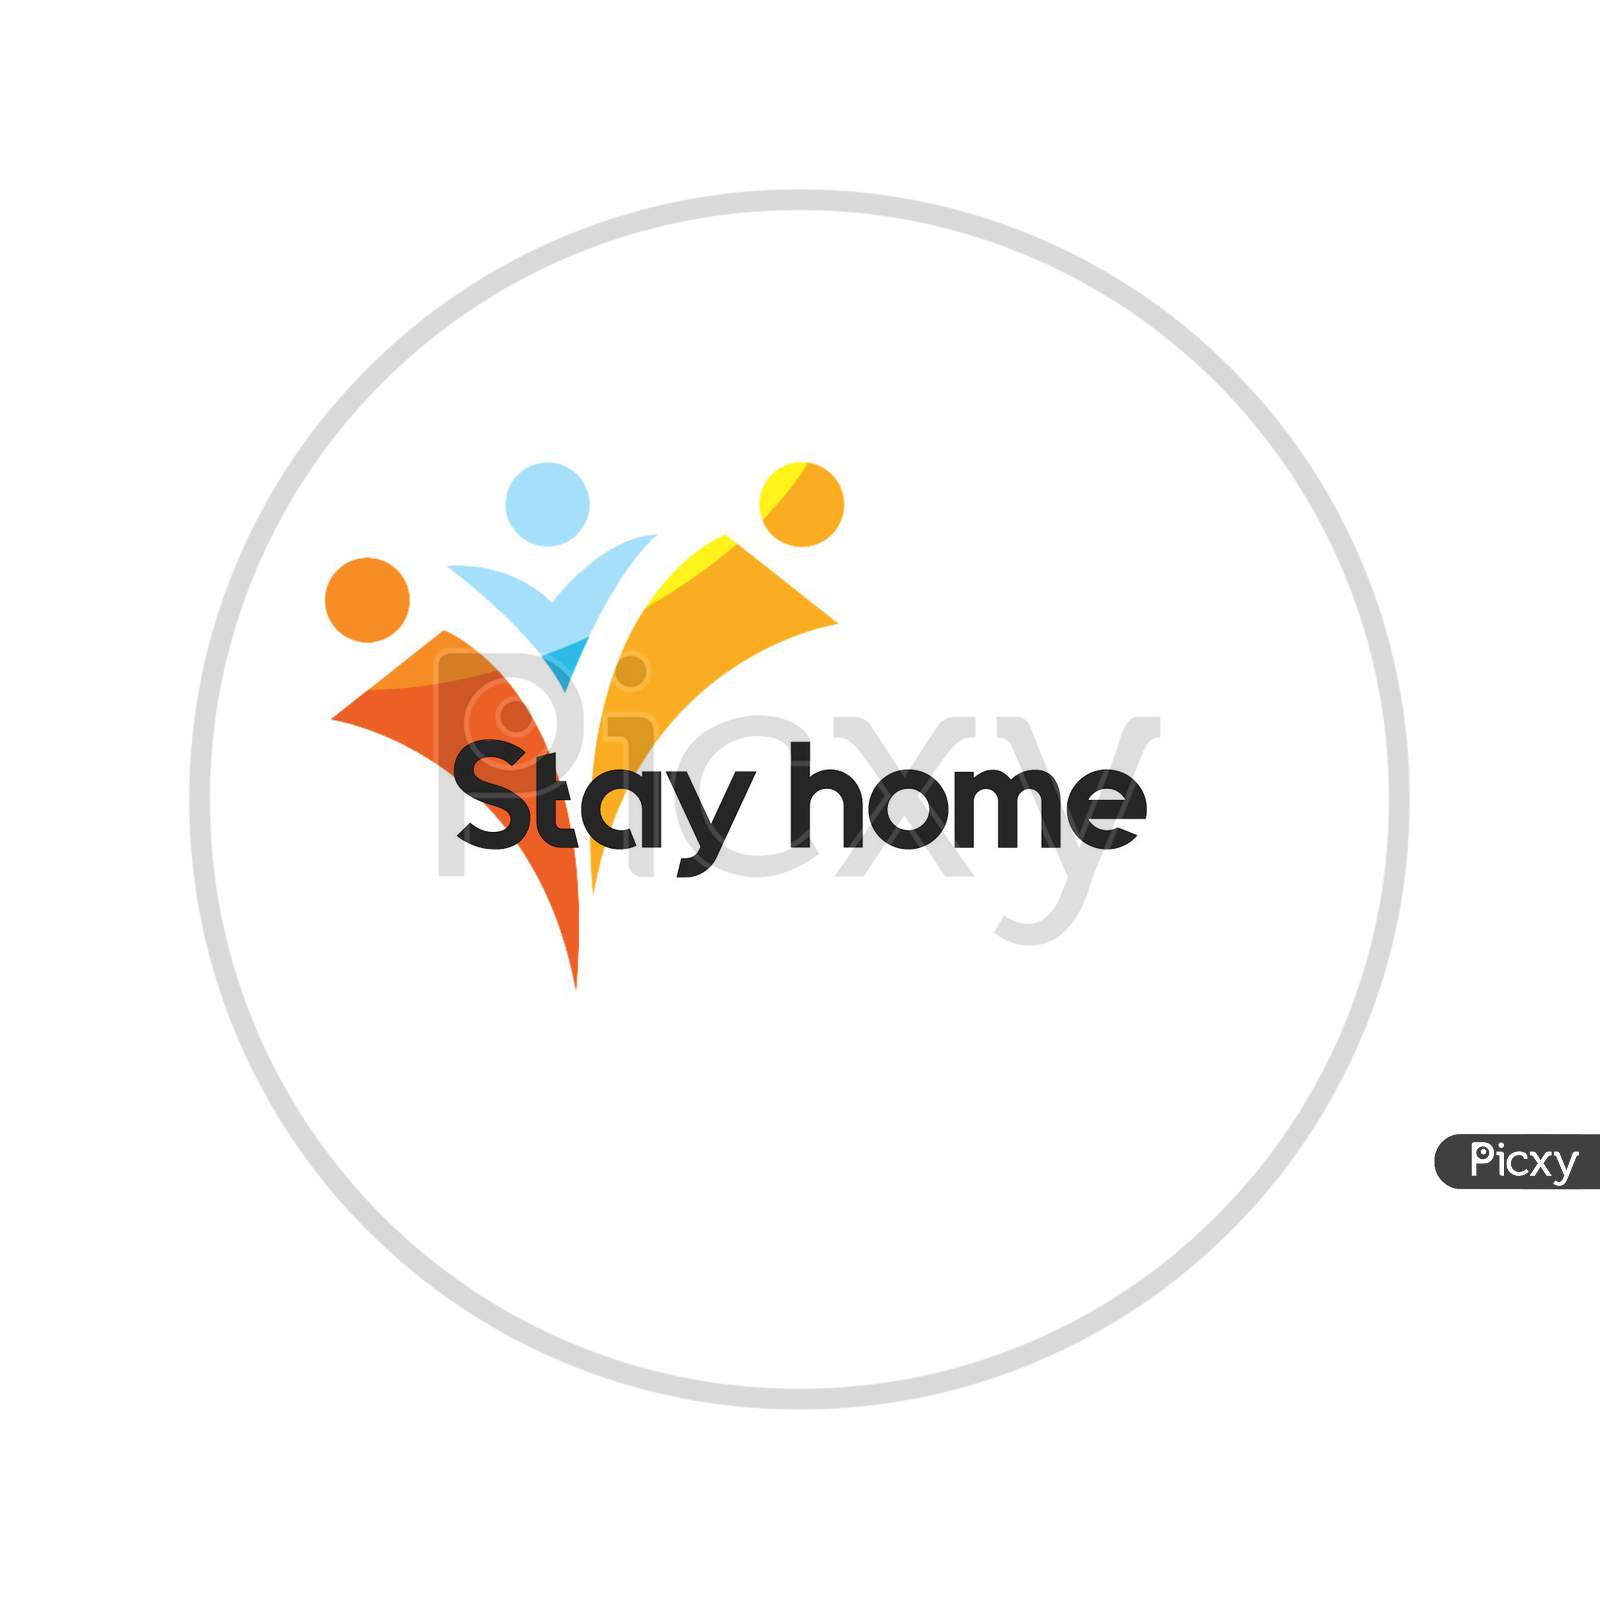 Stay home new wallpaper with white background